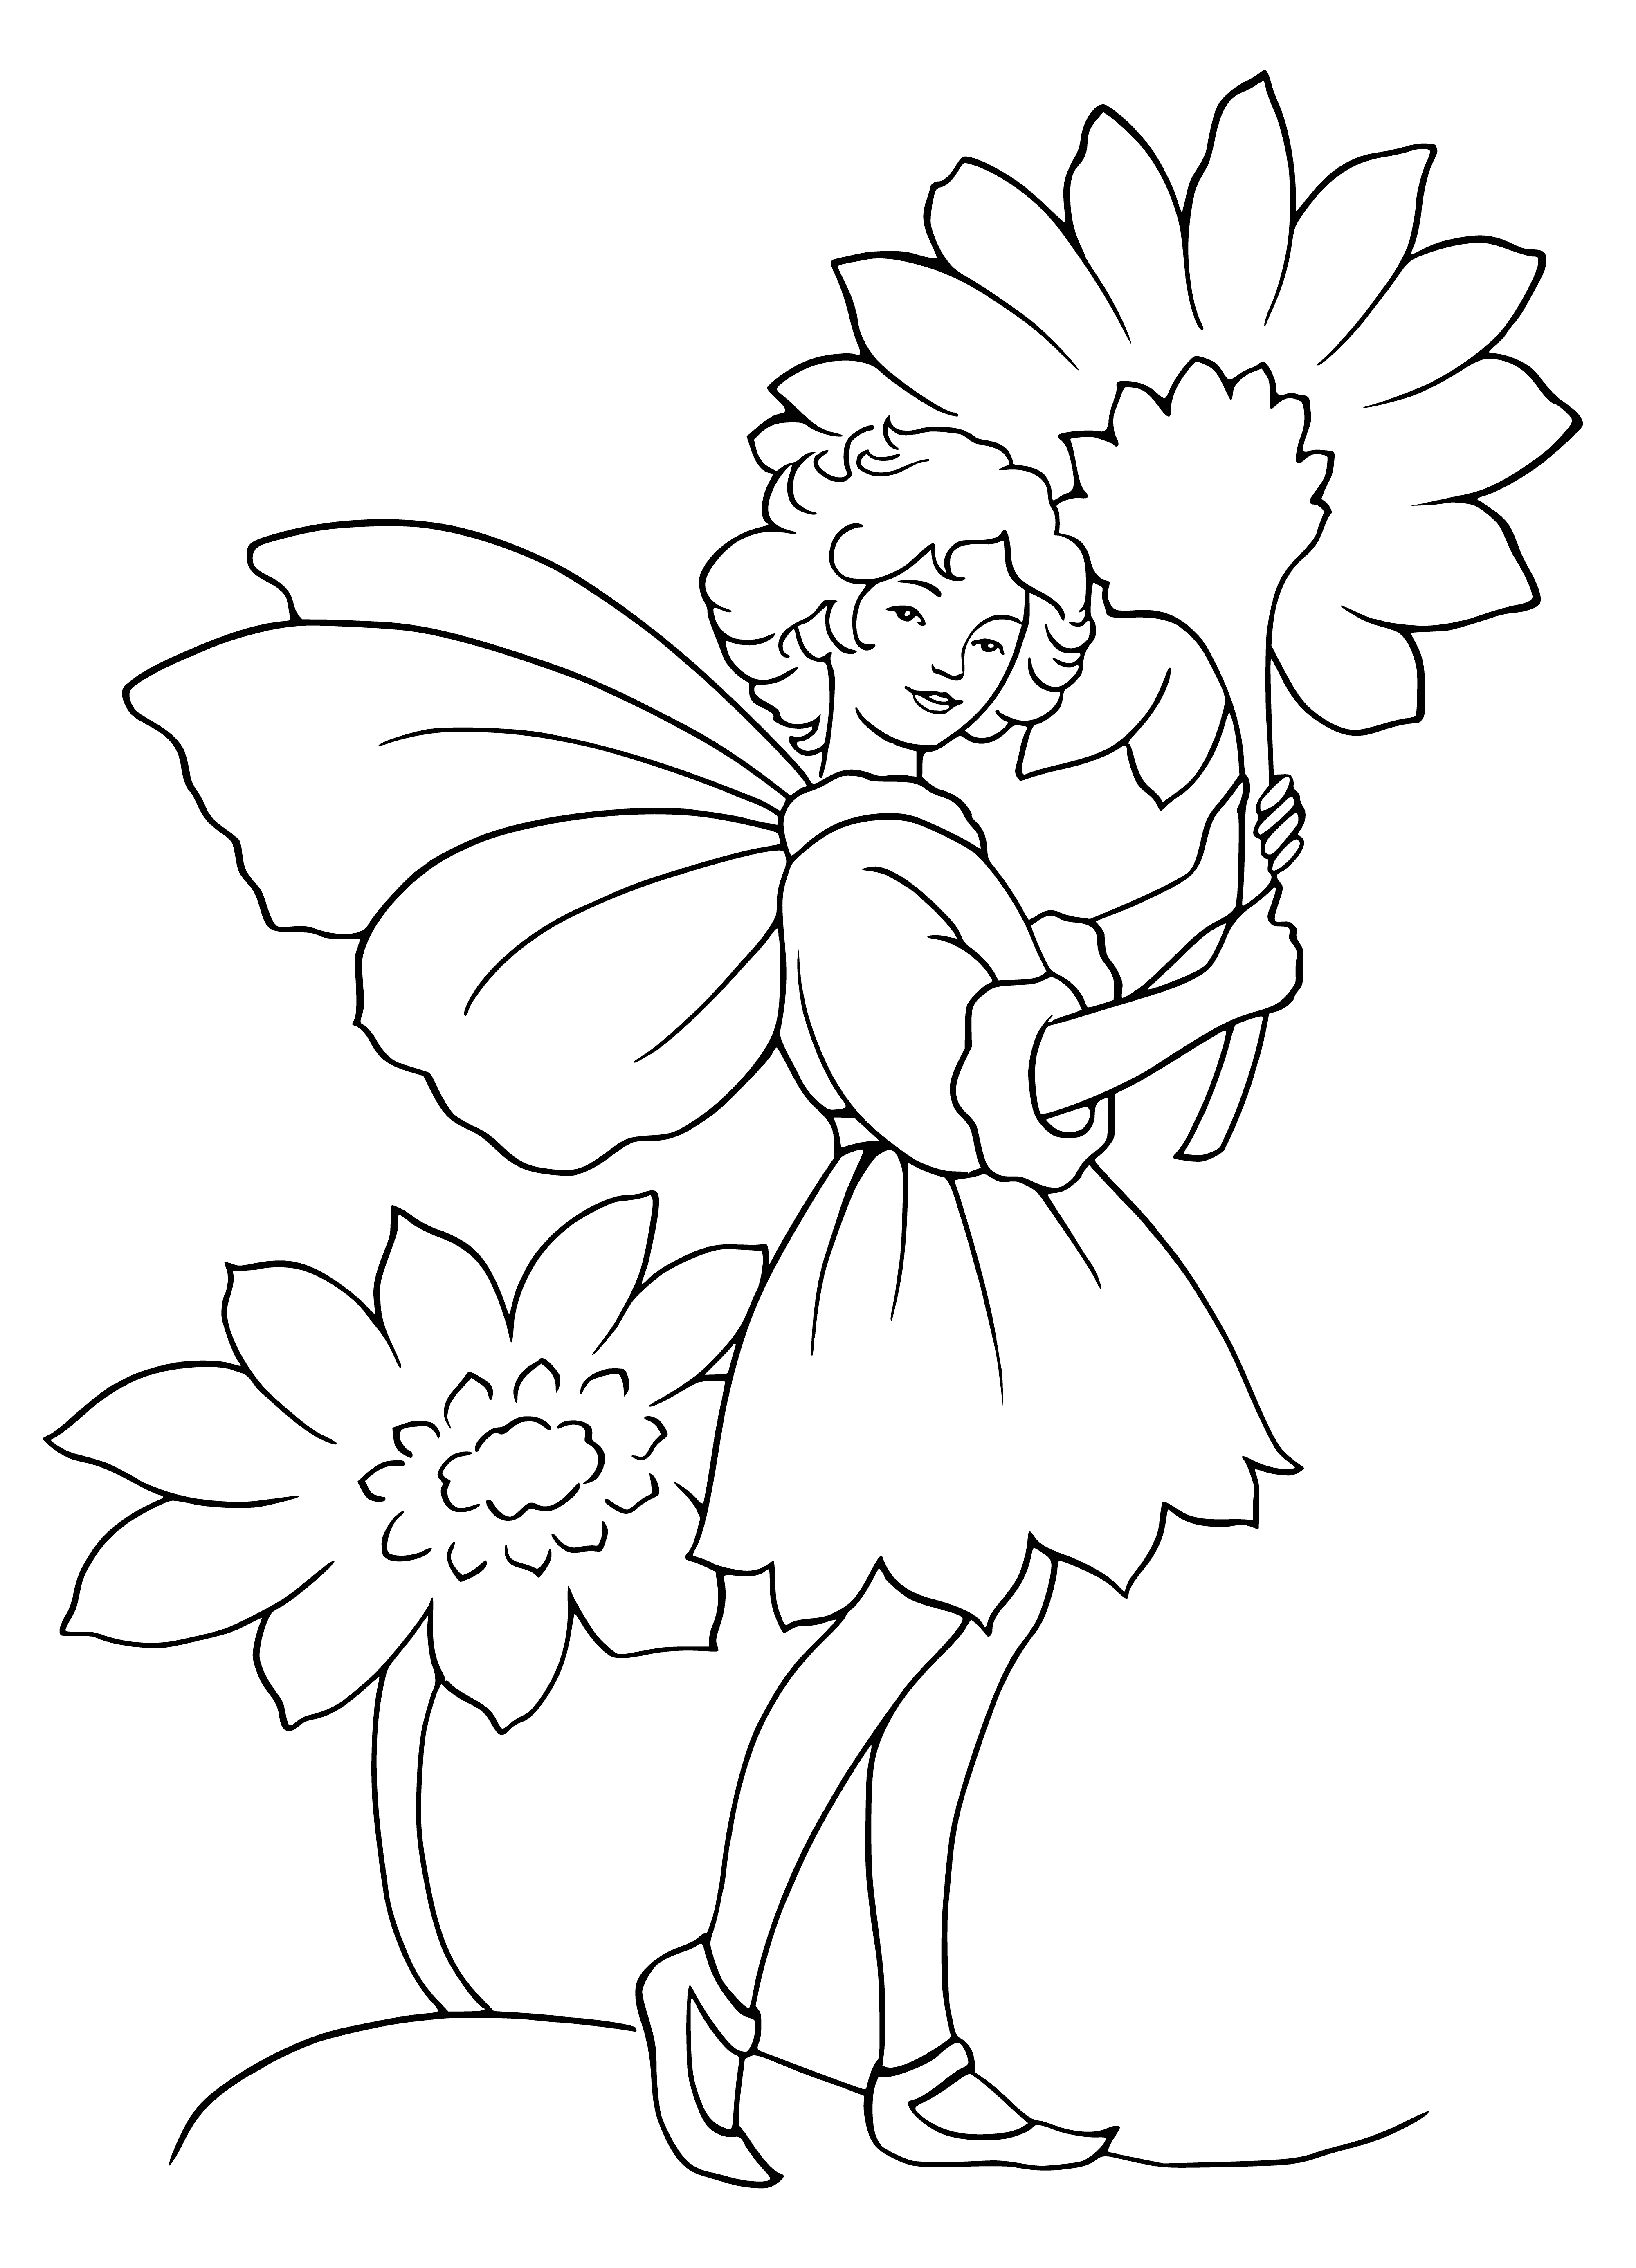 coloring page: A fairy with pink flower wings, dressed to impress.